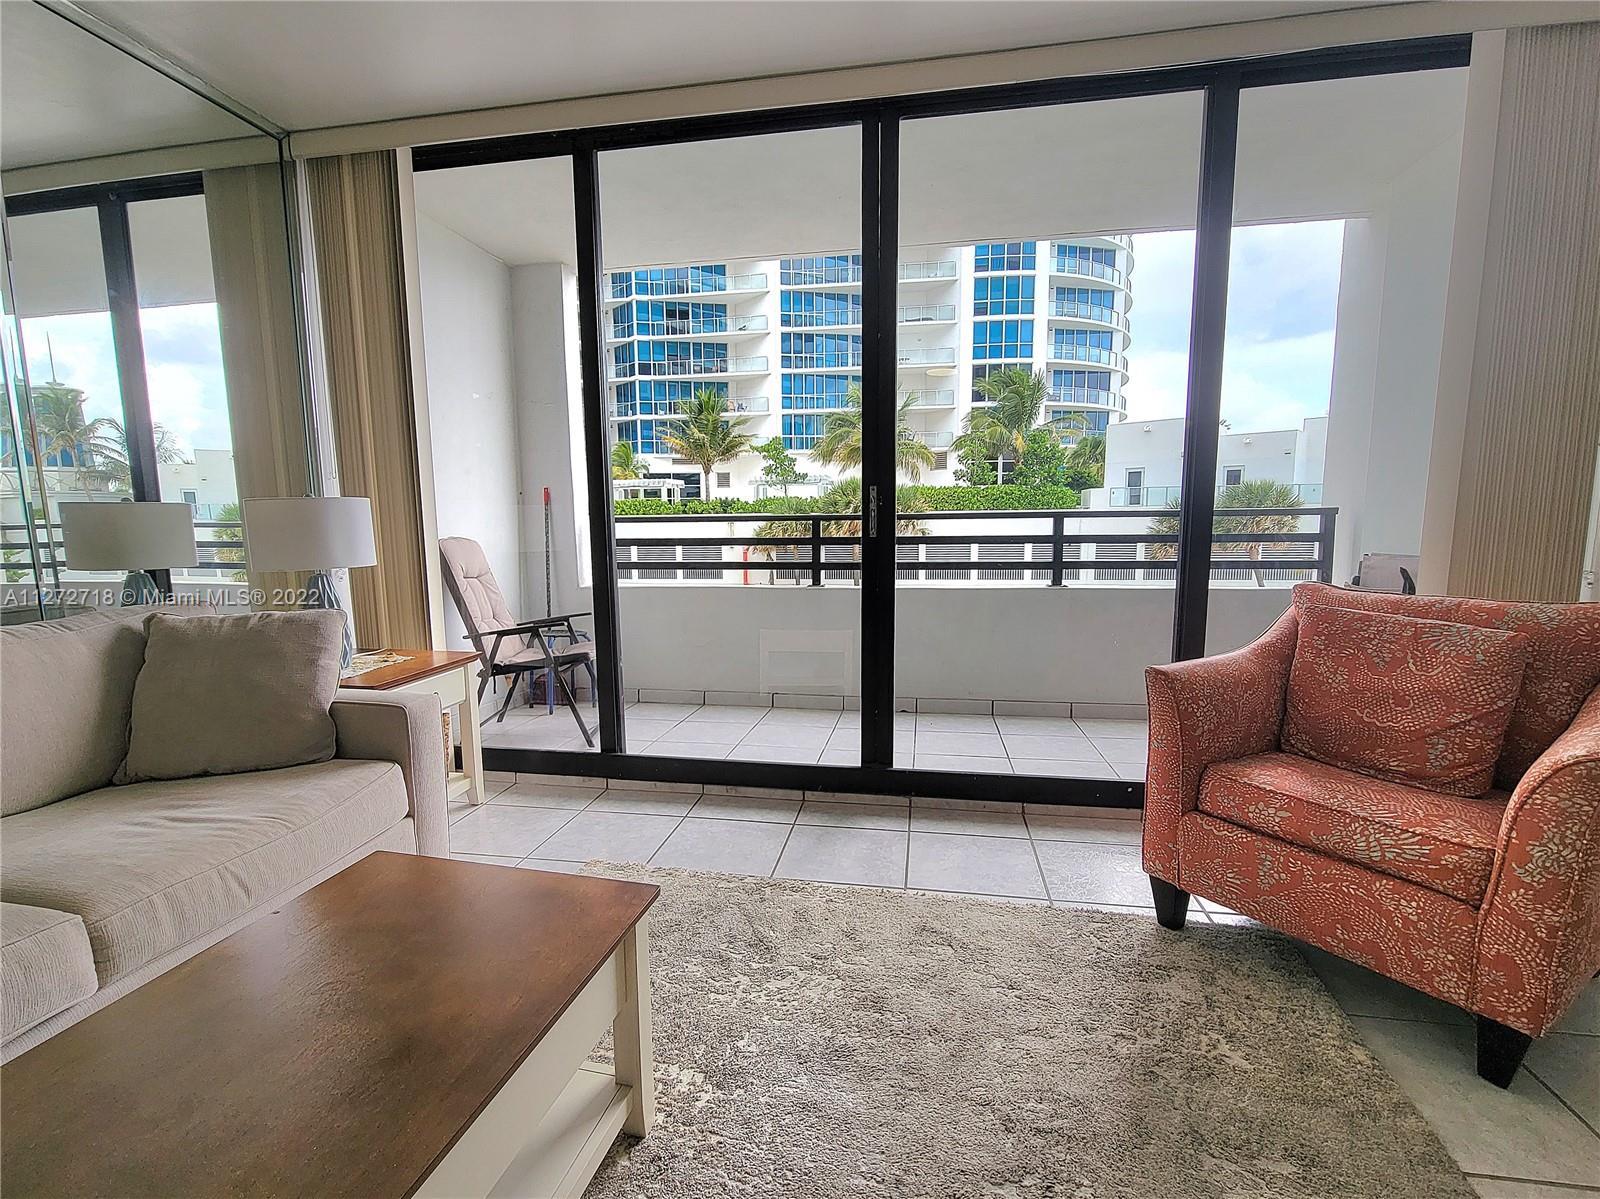 Your Opportunity to Own an Oceanfront Condo with some Ocean View.   This Condo is well maintained an